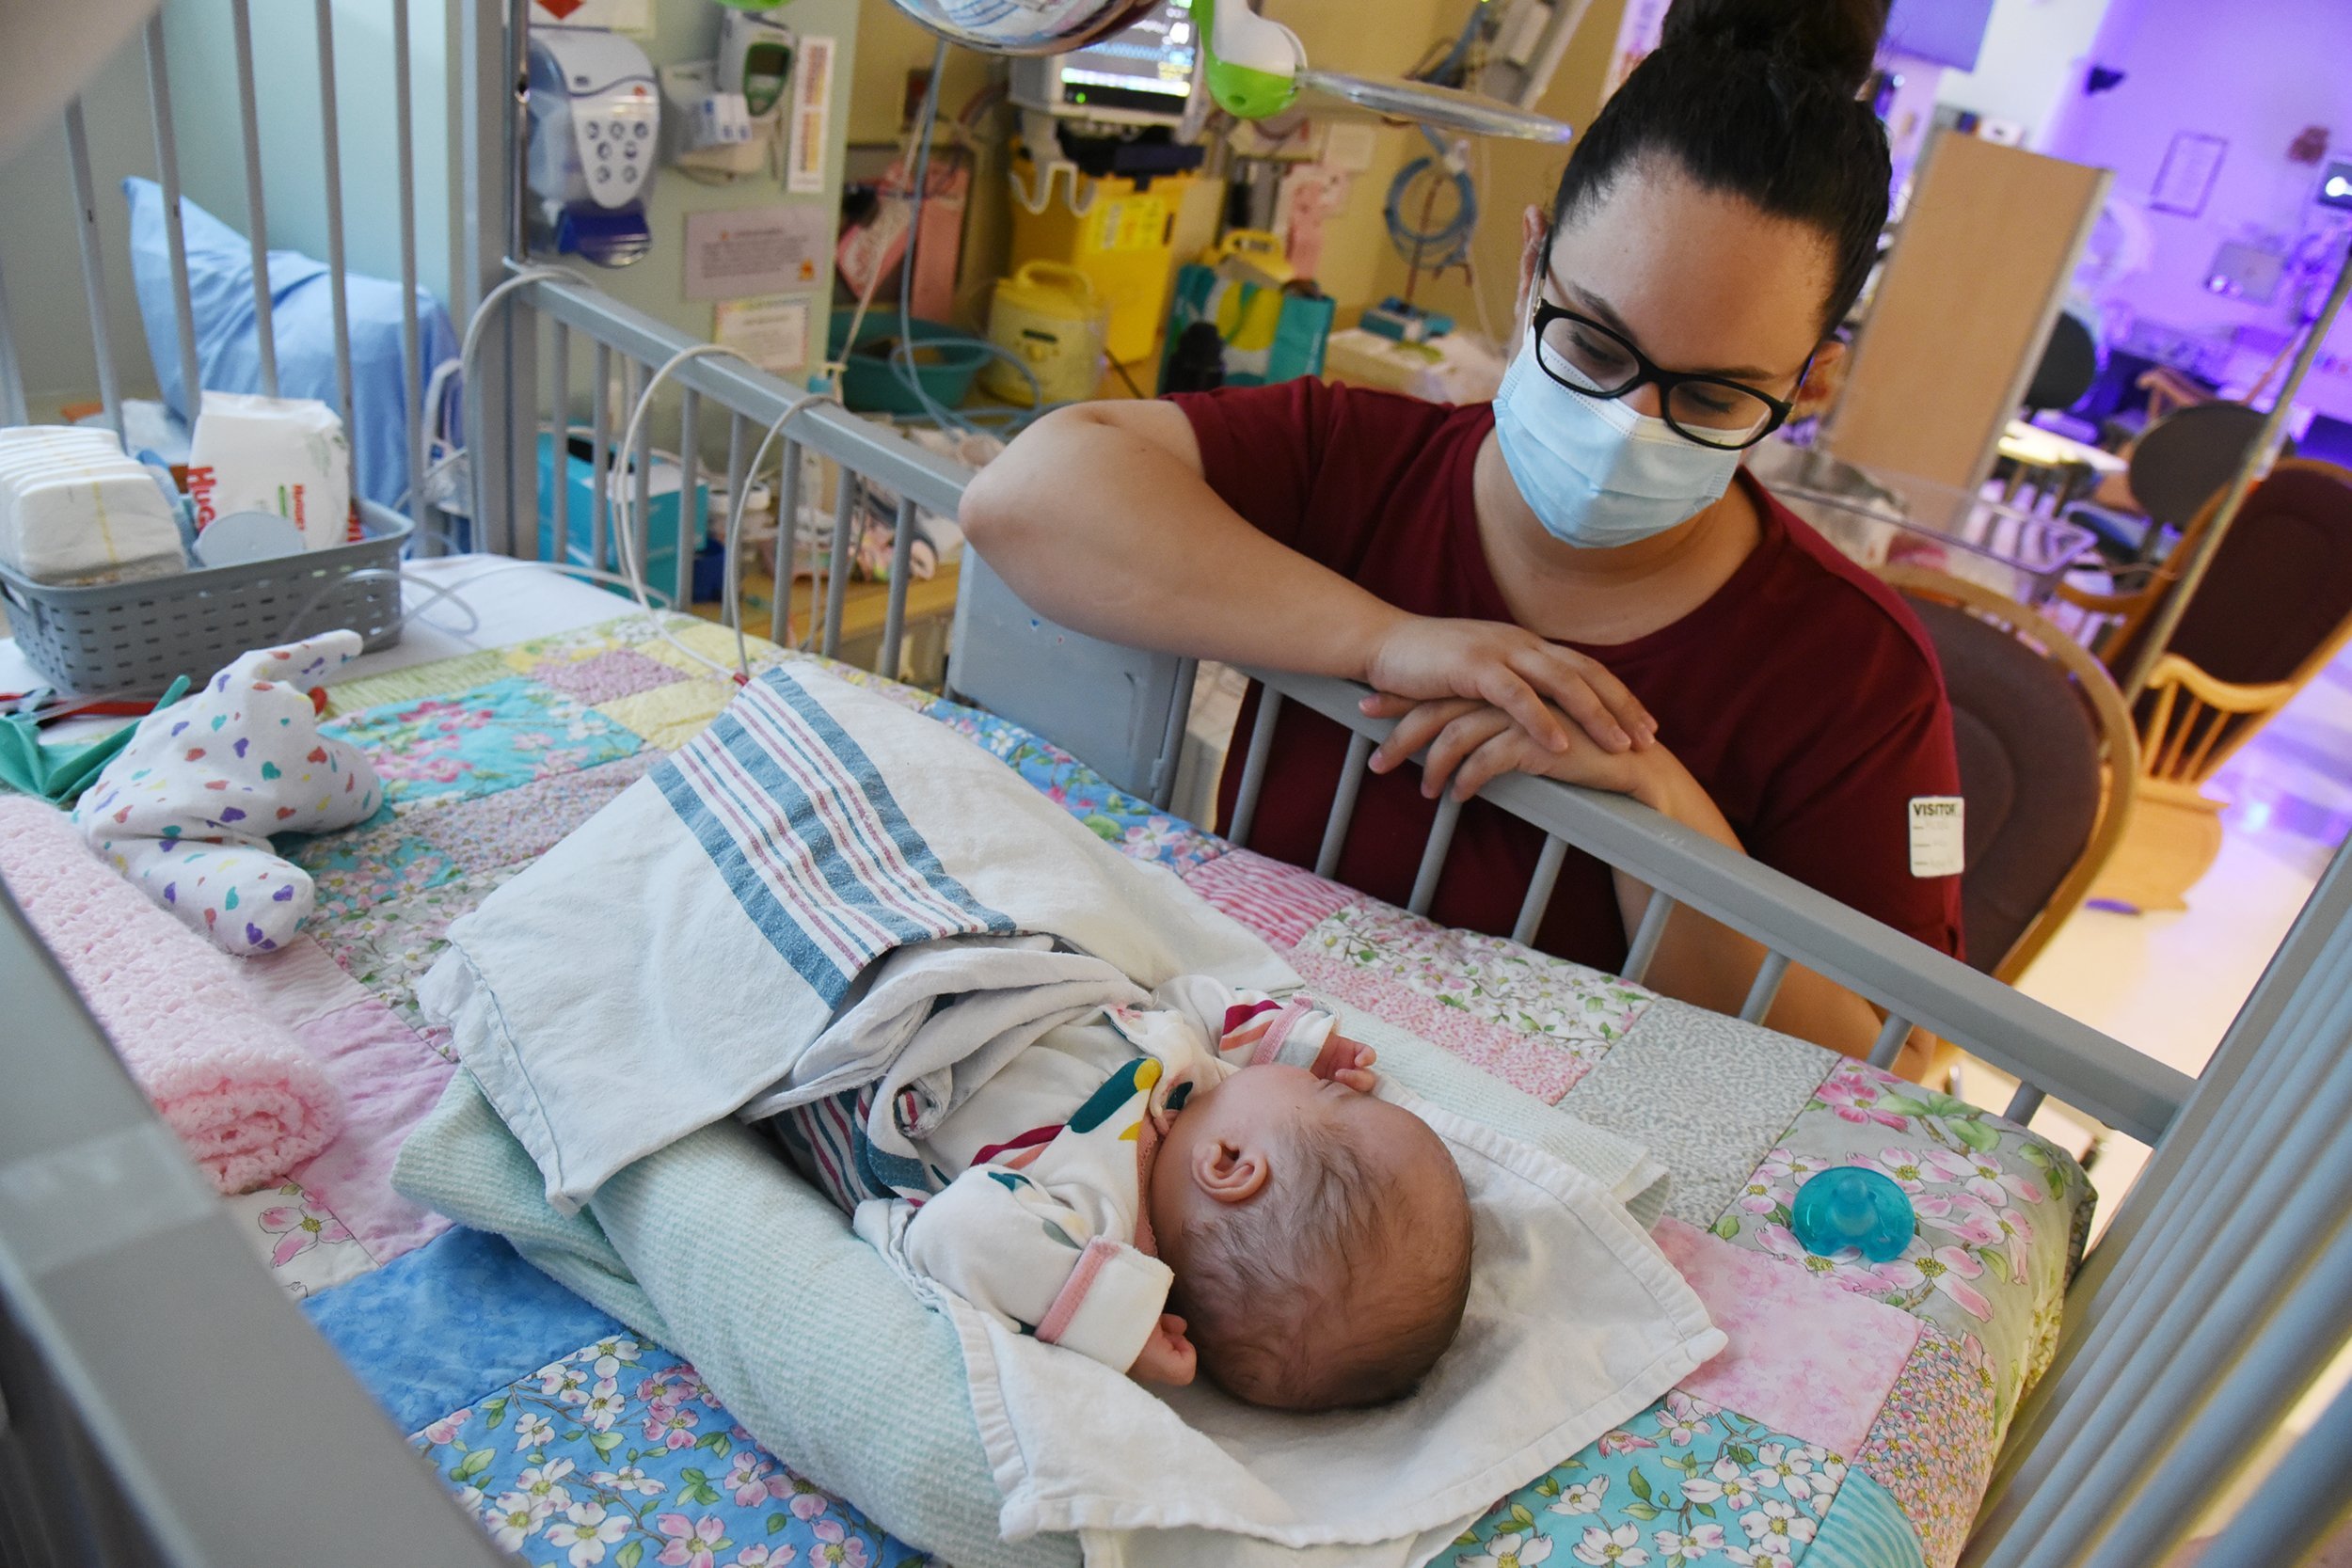 A woman looks at a baby in a hospital room